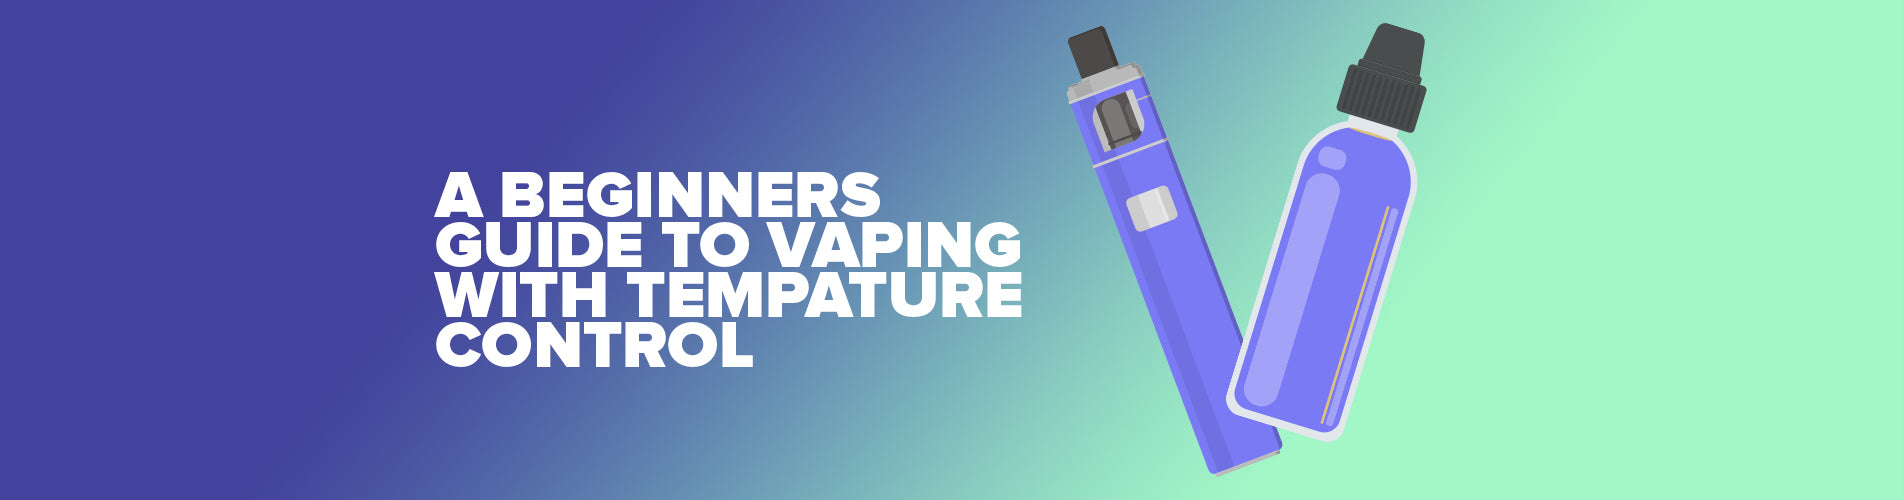 A Beginner's Guide To Vaping With Temperature Control